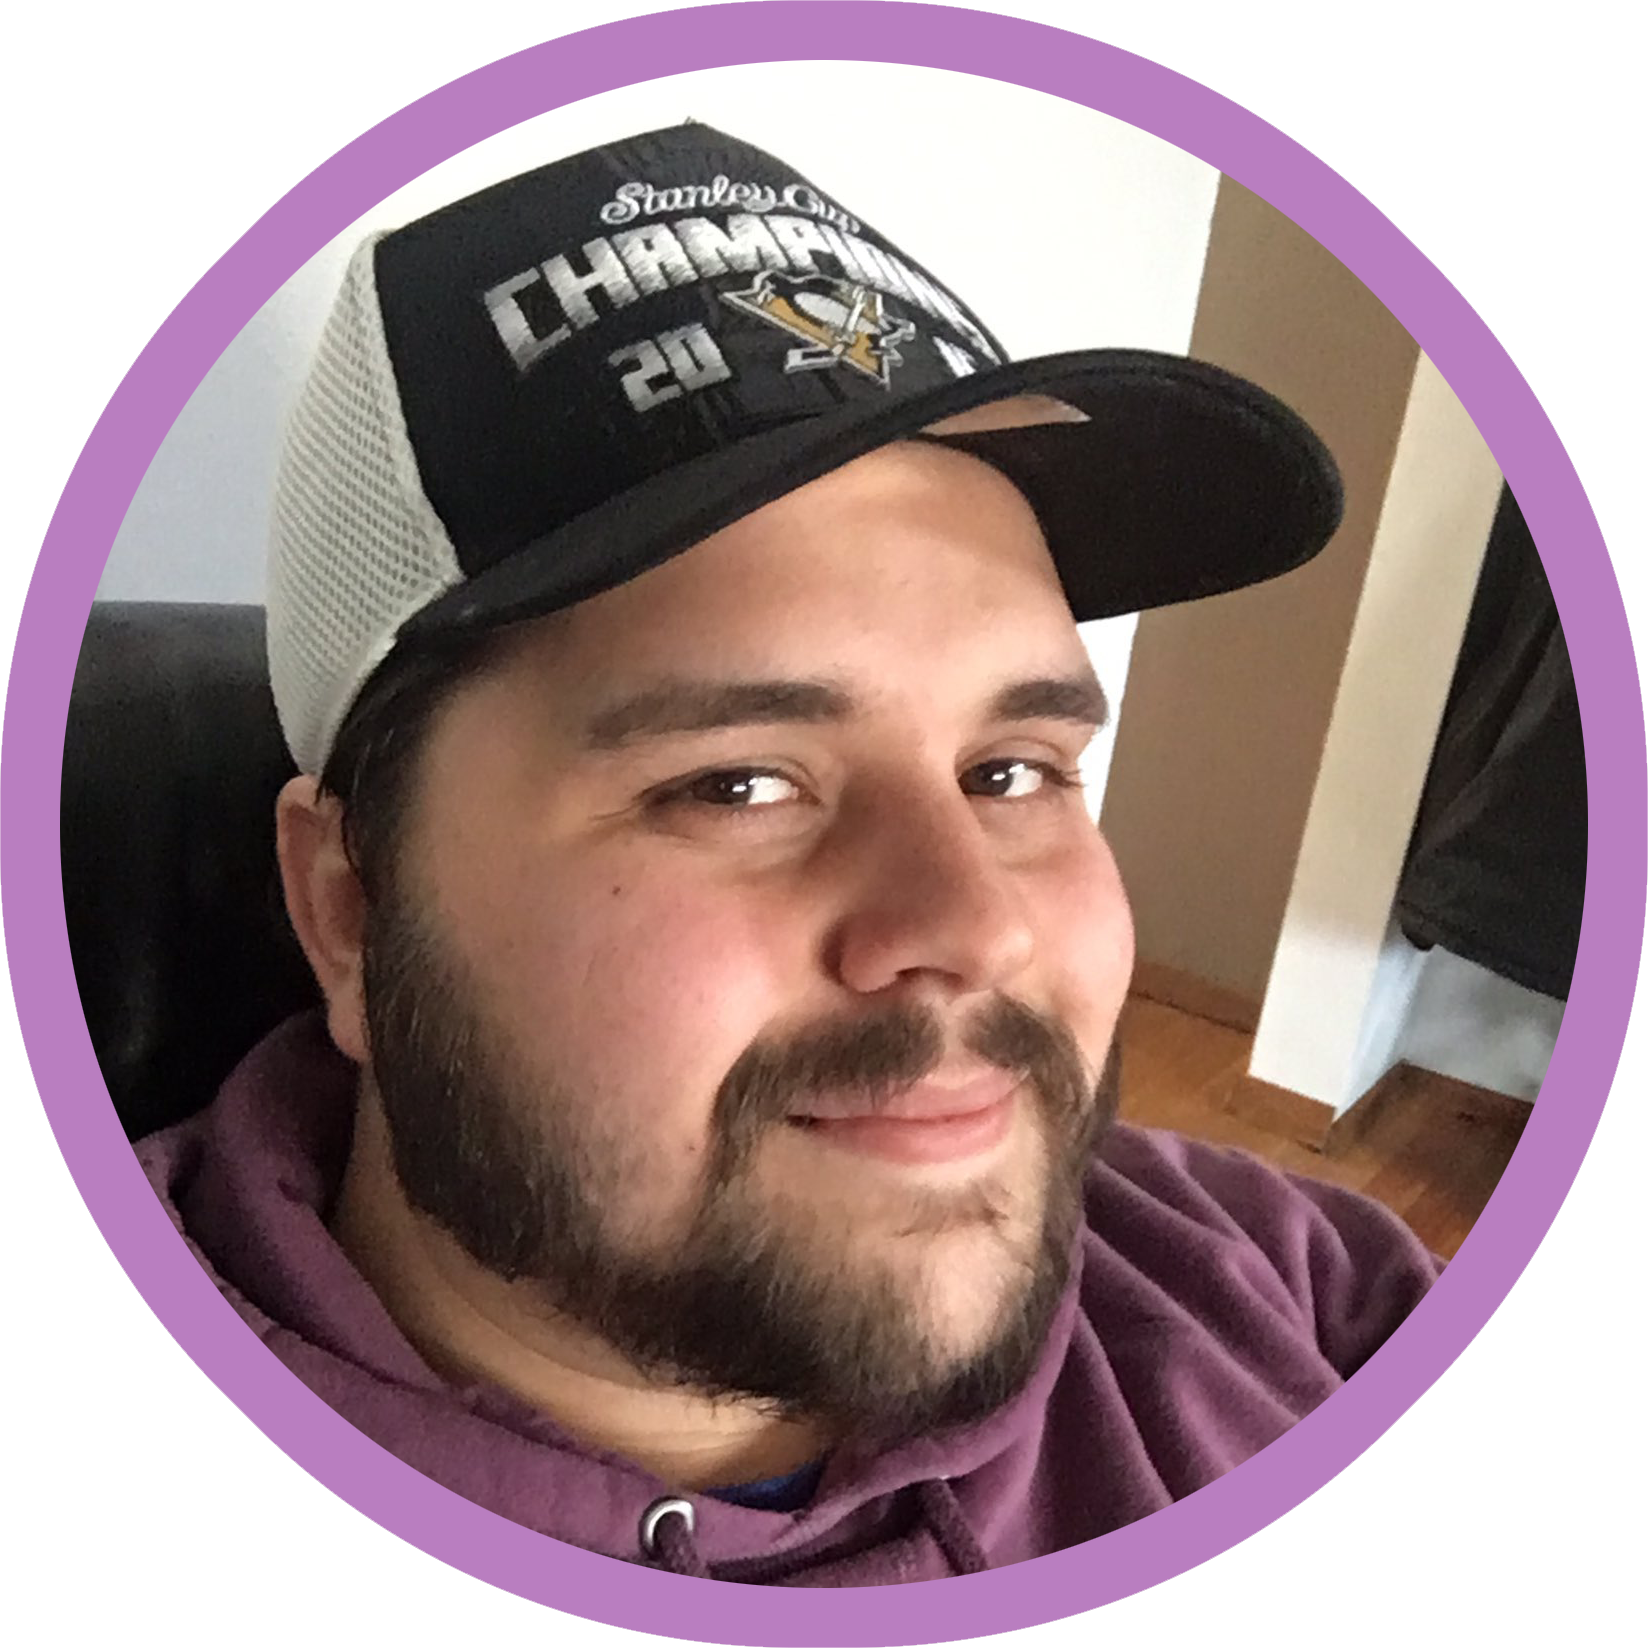 evan scott huber. he has brown eyes and hair, a mustache and beard. he is wearing a purple hoodie and a black pittsburgh penguins hat.